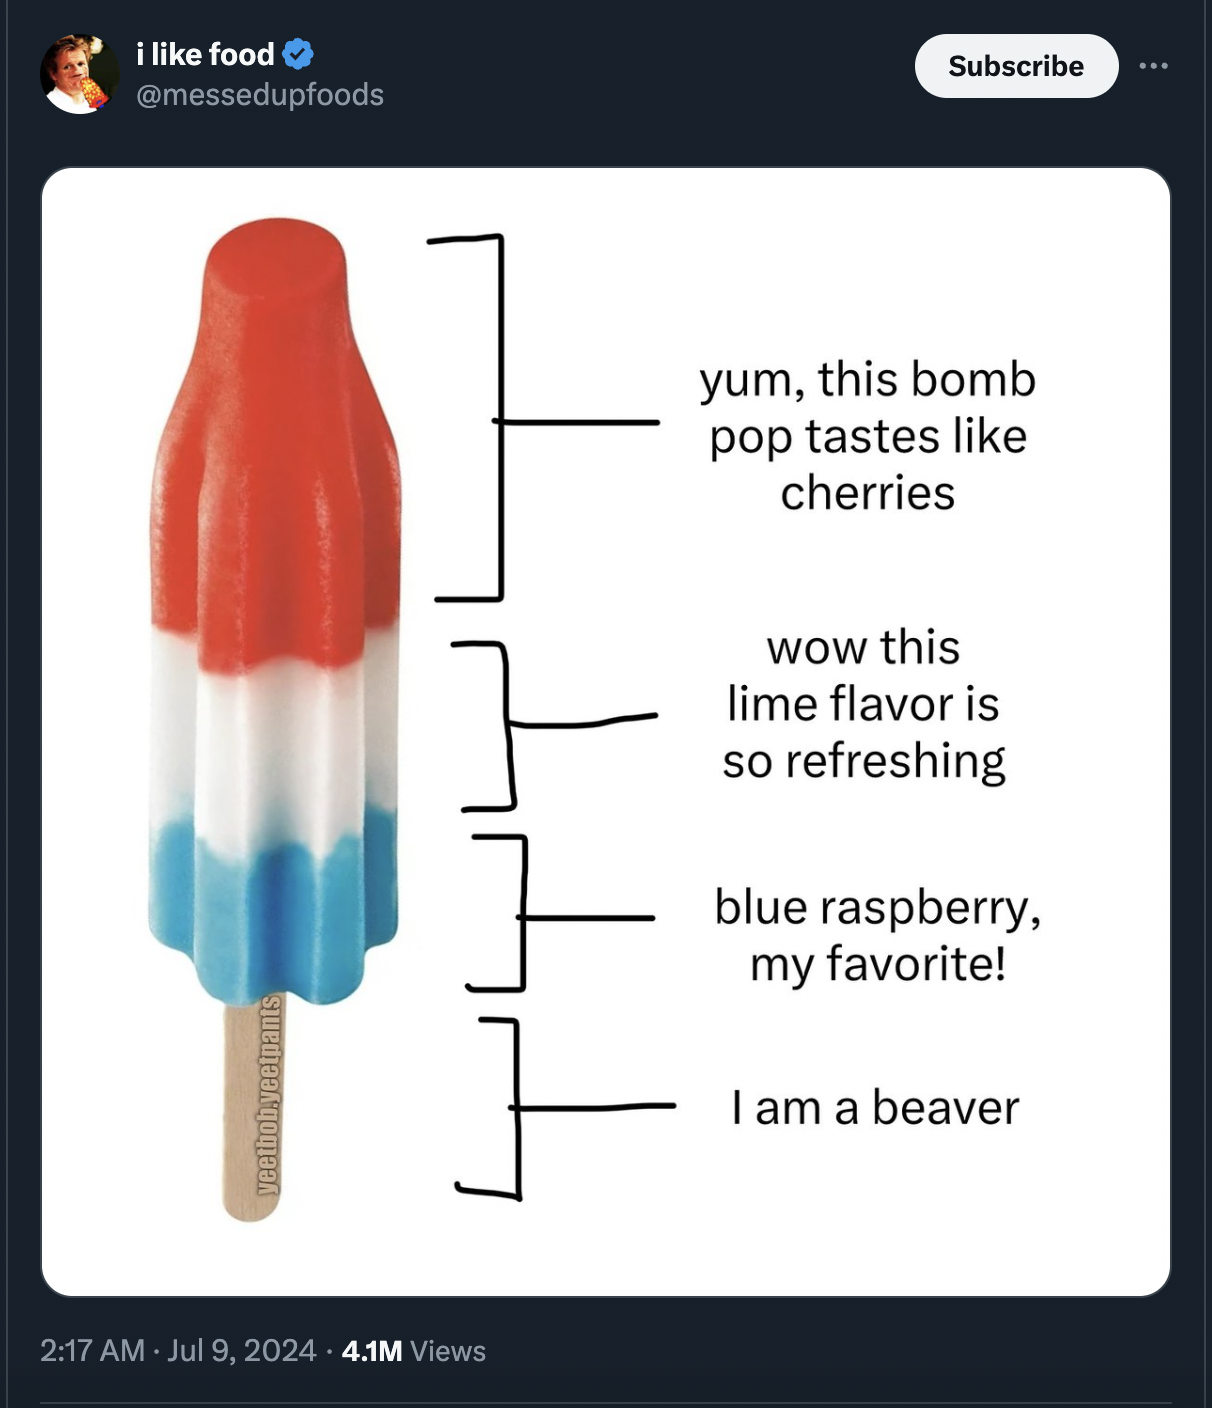 bullet - i food 4.1M Views Subscribe yum, this bomb pop tastes cherries wow this lime flavor is so refreshing blue raspberry, my favorite! I am a beaver